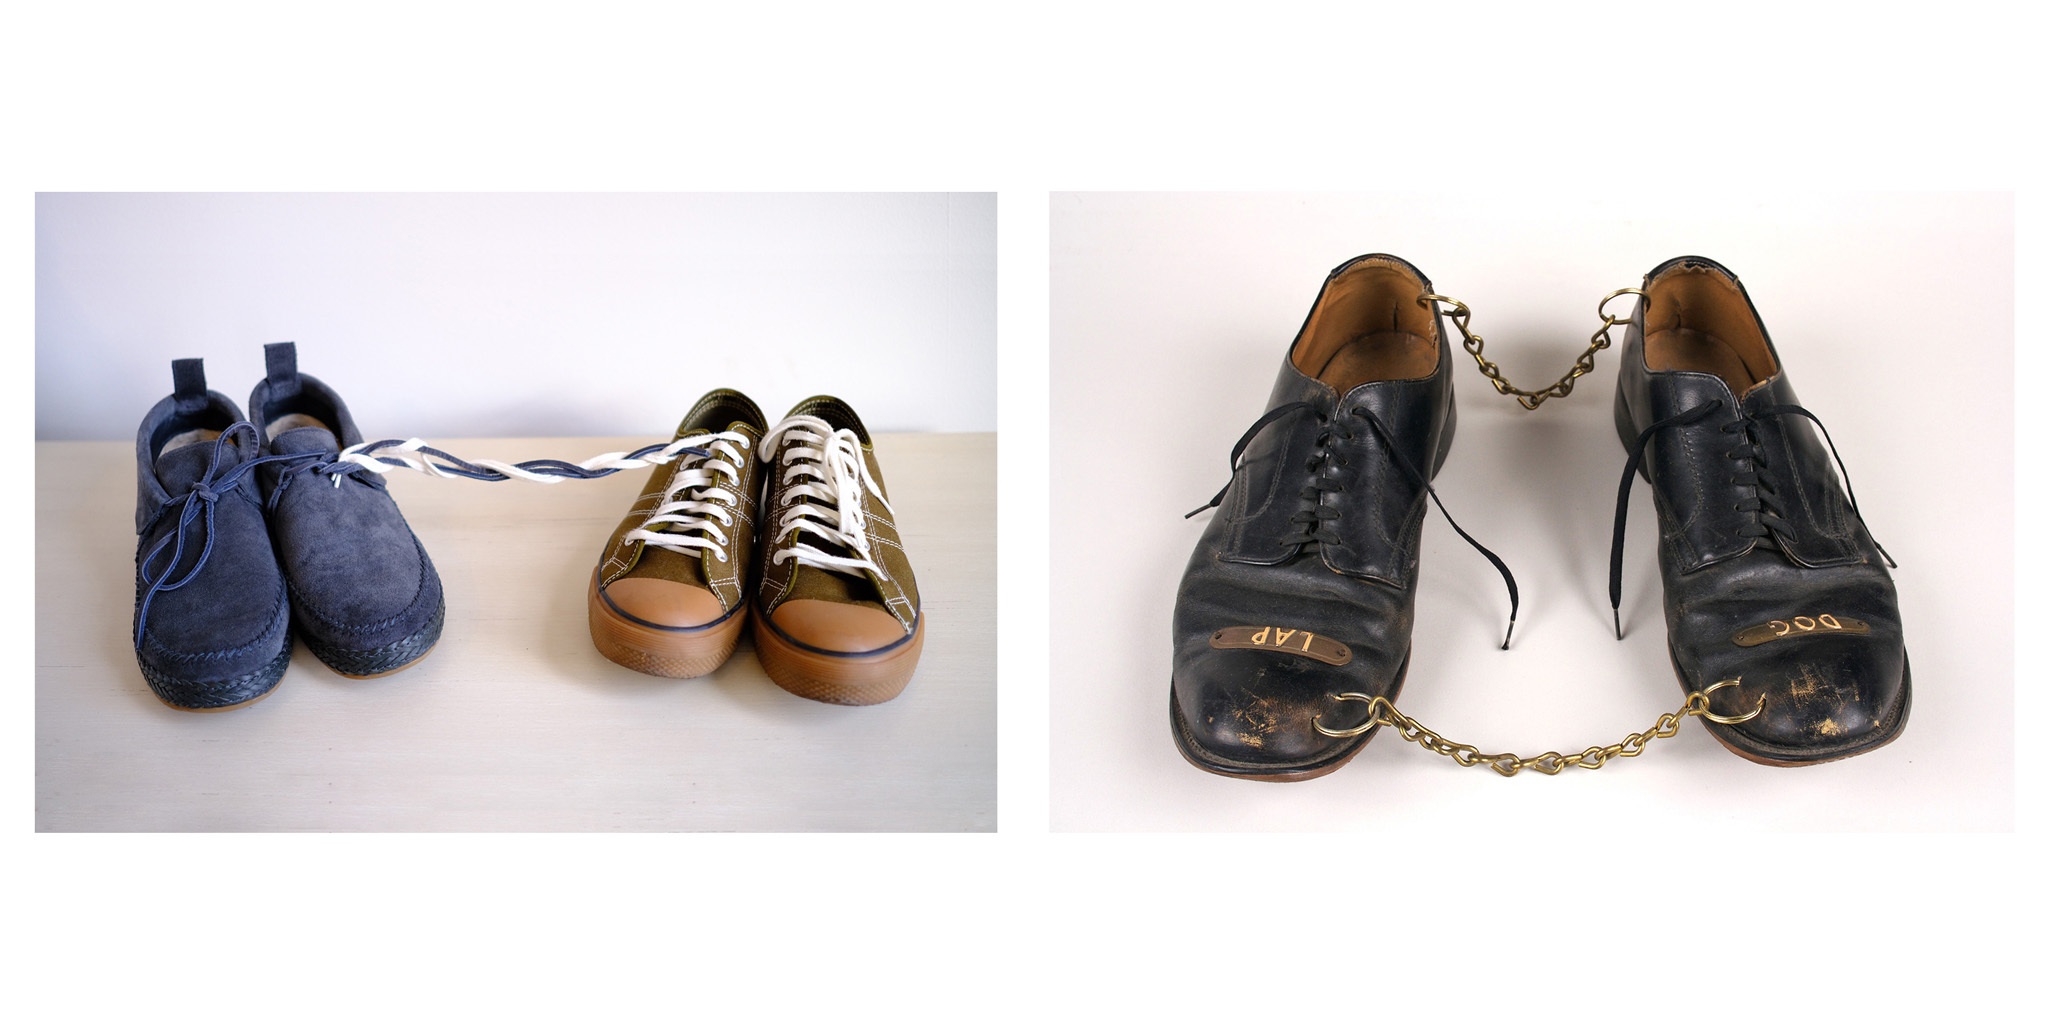 Evian Pan '17 [on Nayland Blake's _Lap Dog_, 1986, leather shoes, brass labels and chains, Gift of Patti and Frank Kolodny, 2008.12.1](https://tang.skidmore.edu/collection/artworks/1164-lap-dog)